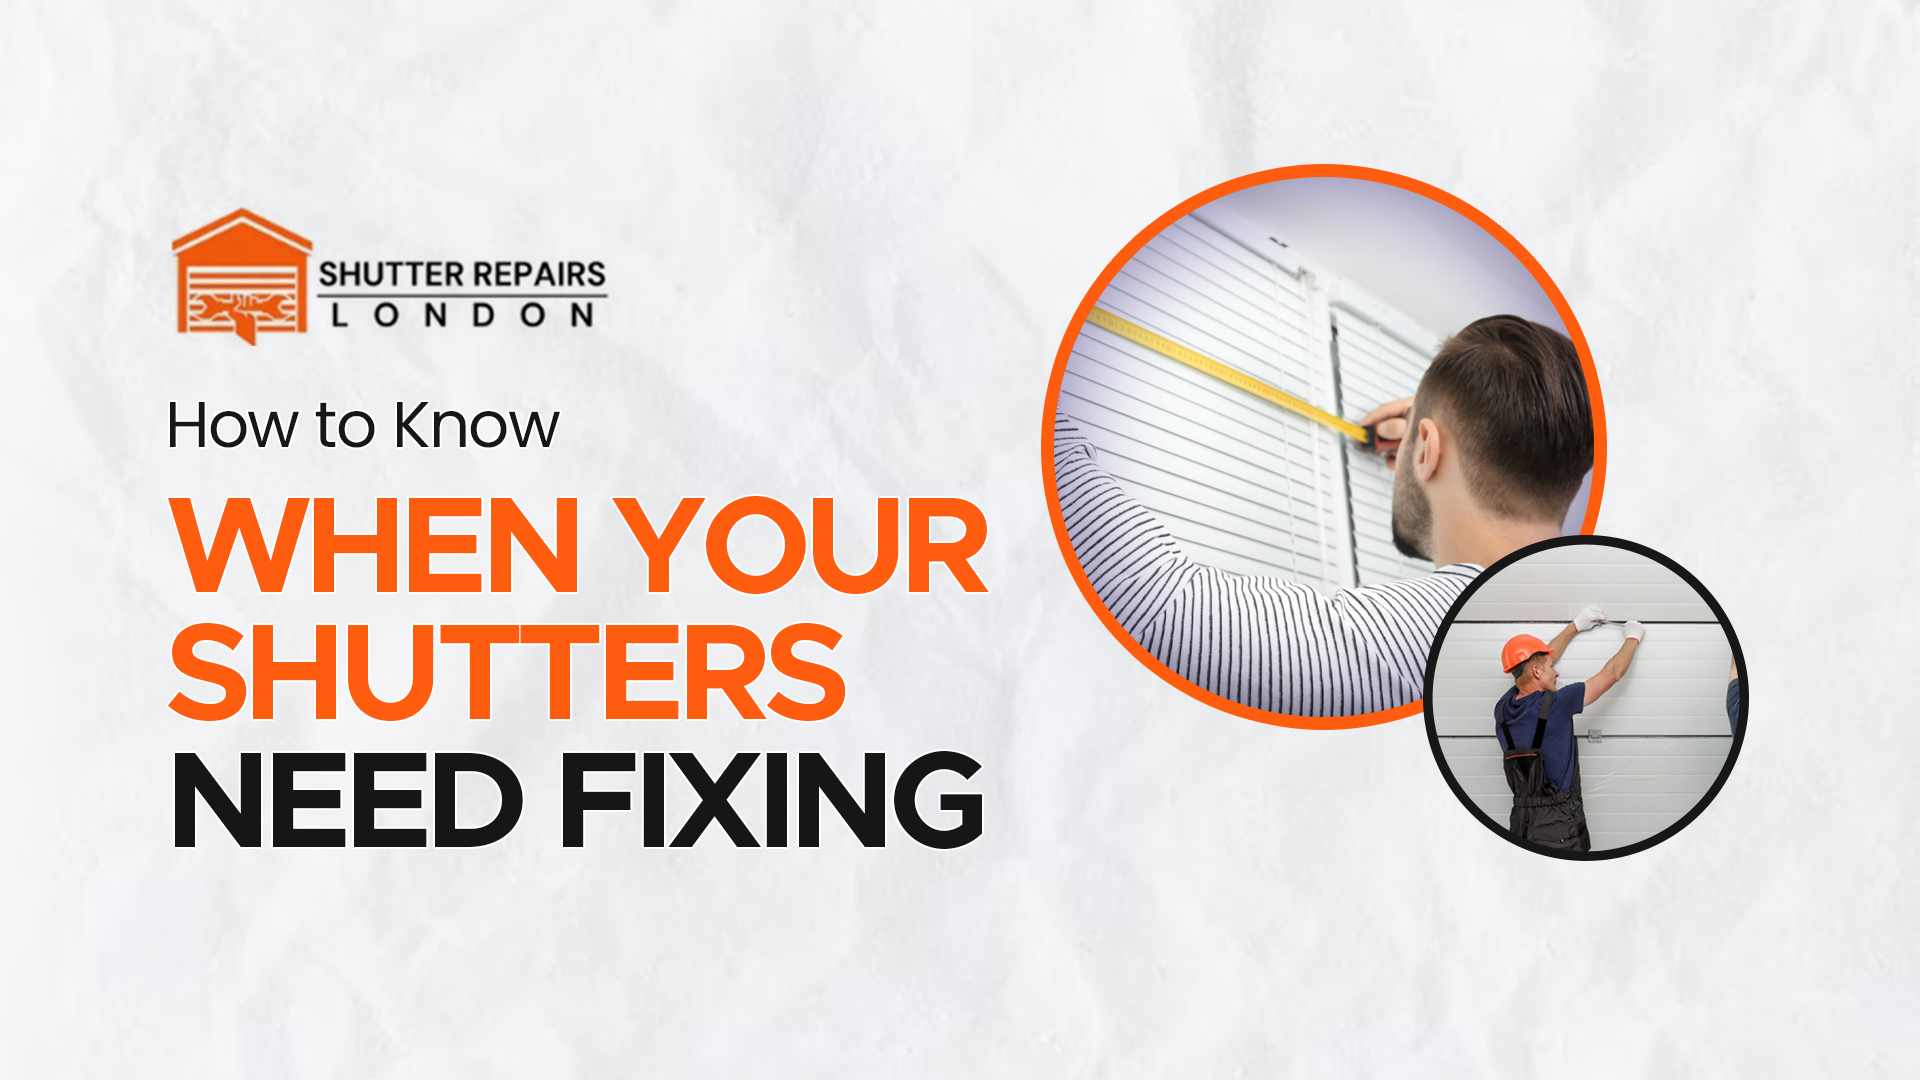 How to Know When Your Shutters Need Fixing